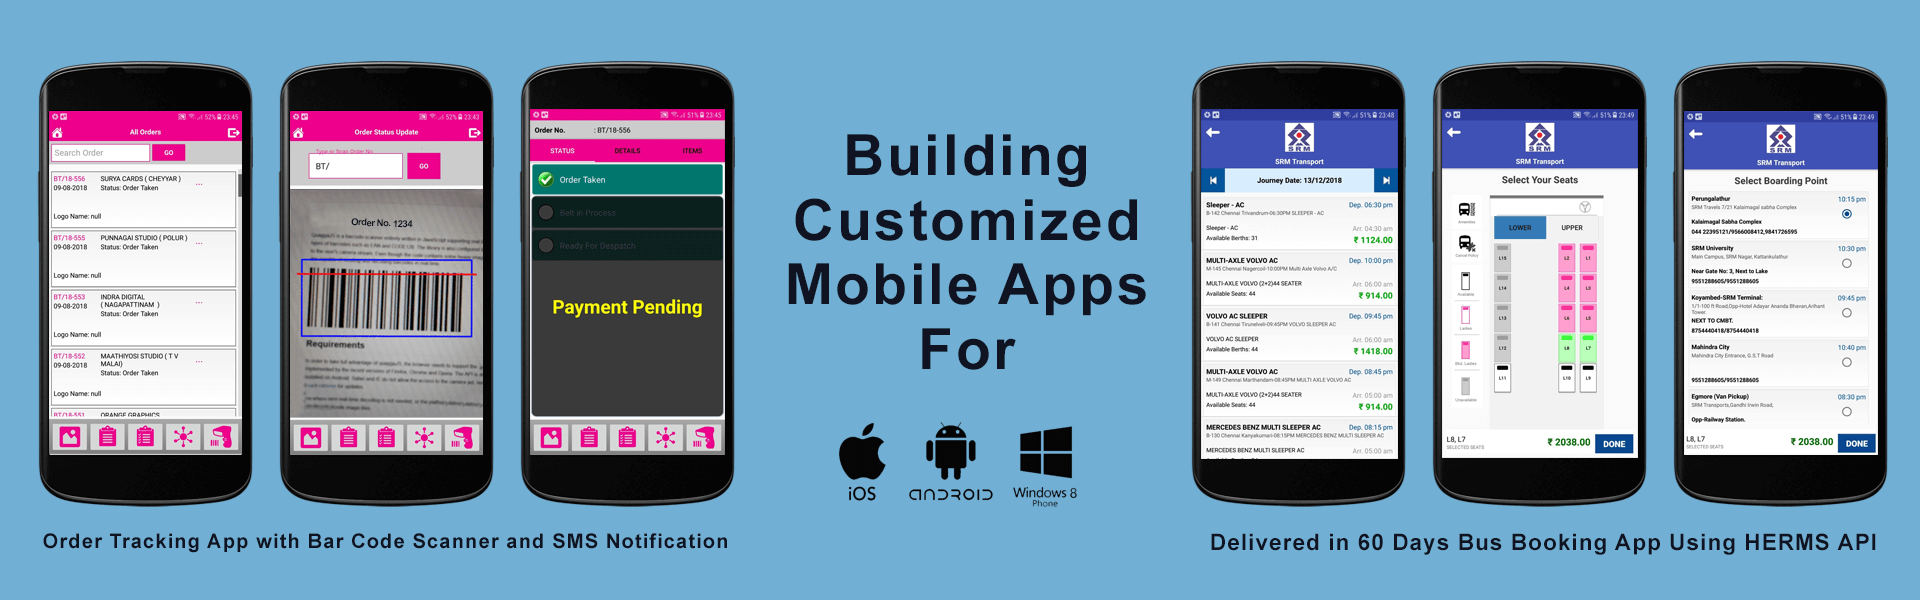 Building Customized Mobile Apps on Android IOS Windows Mobile in Tambaram, Chennai